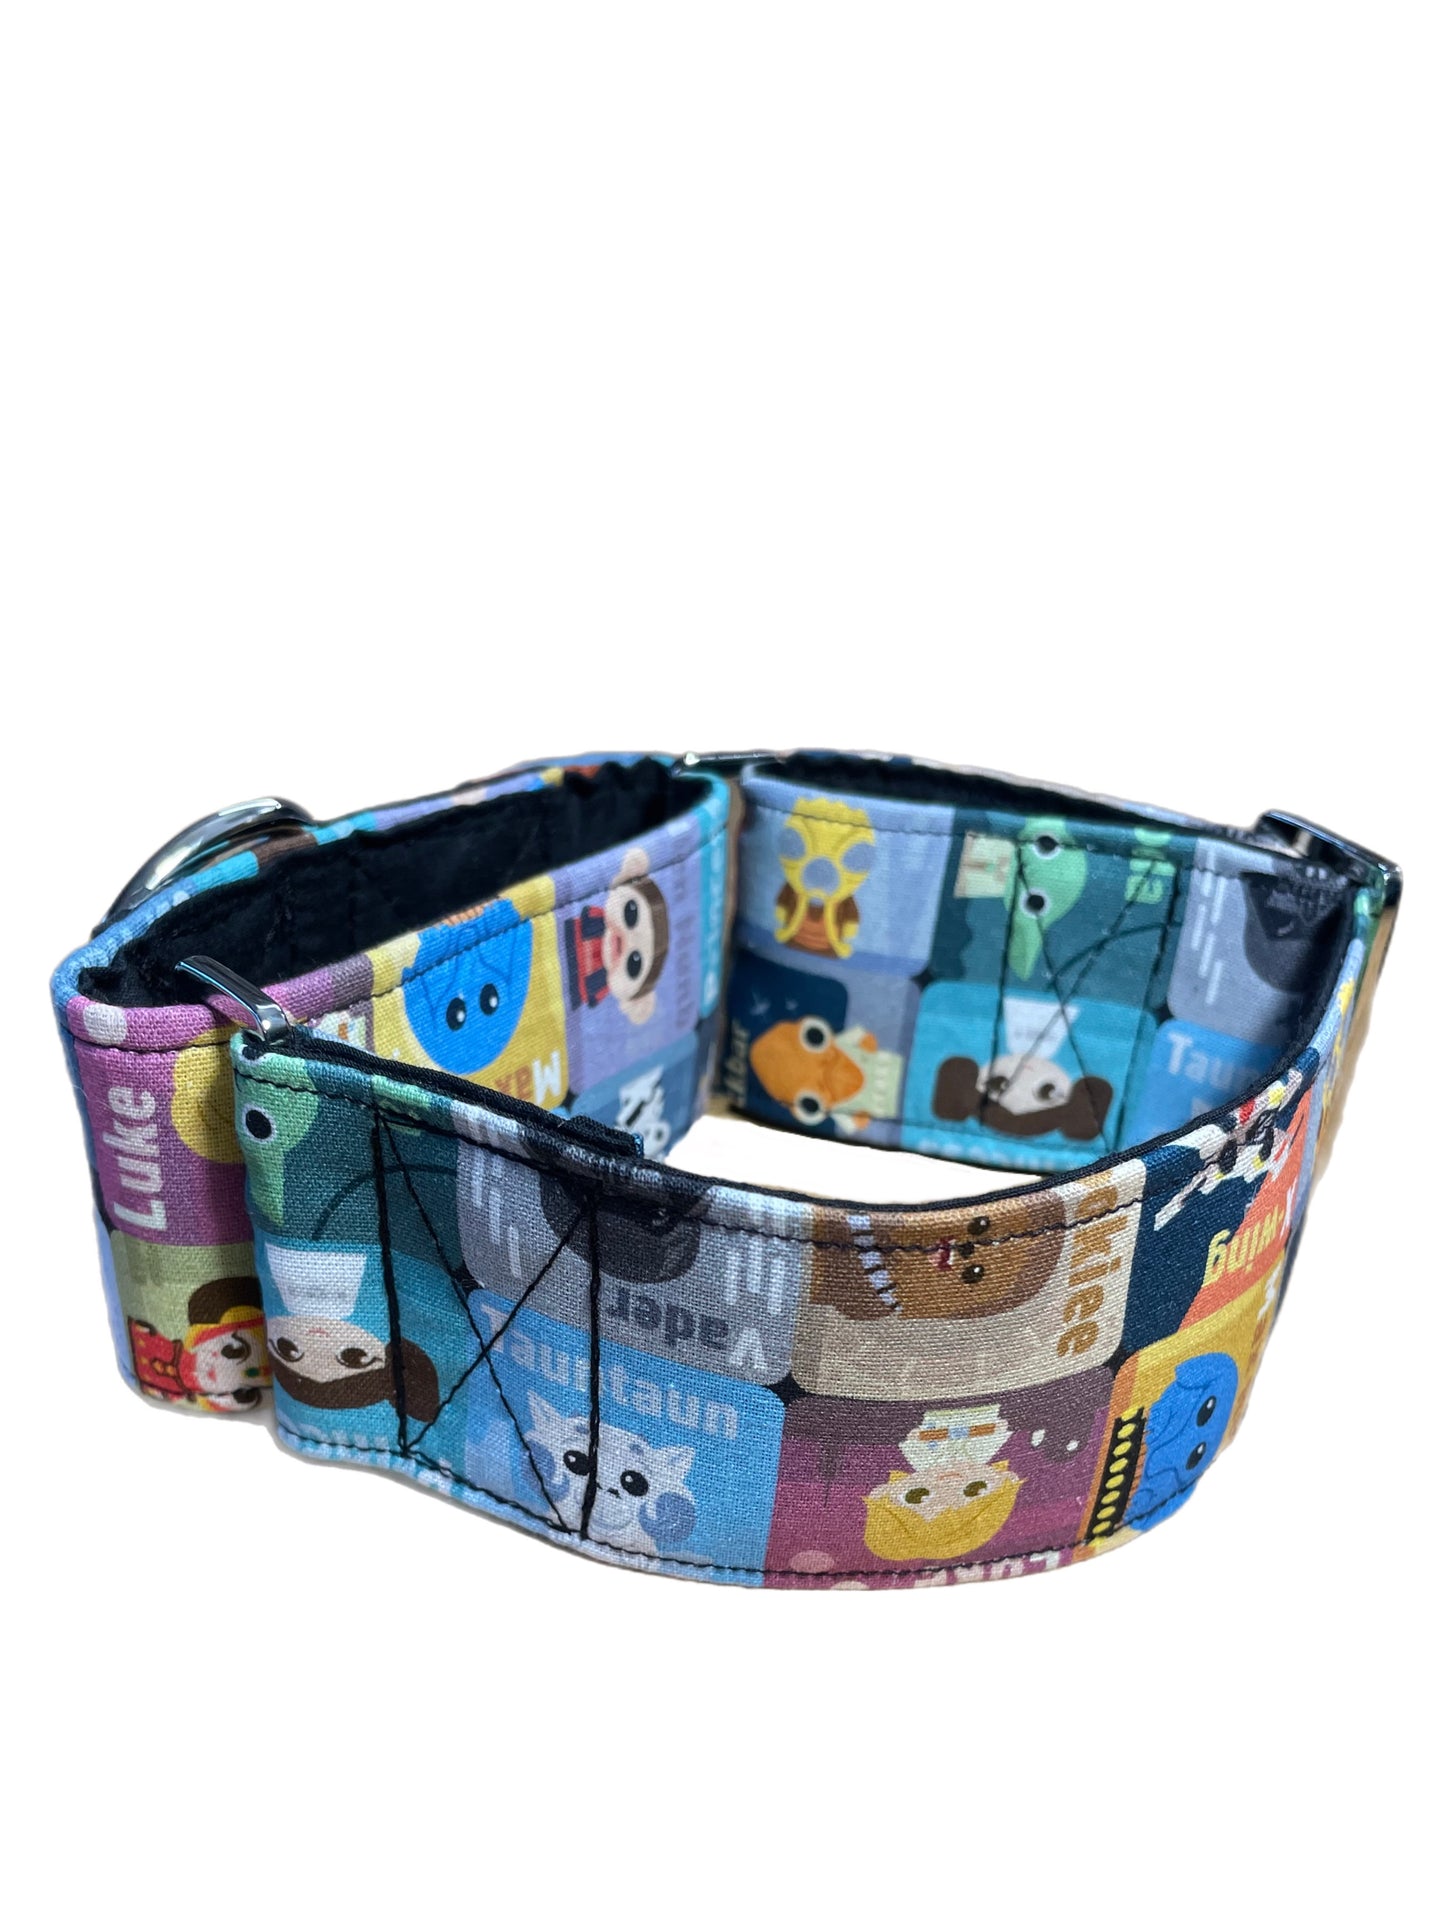 Star Wars greyhound Martingale collar cotton fabric covered 50mm width soft